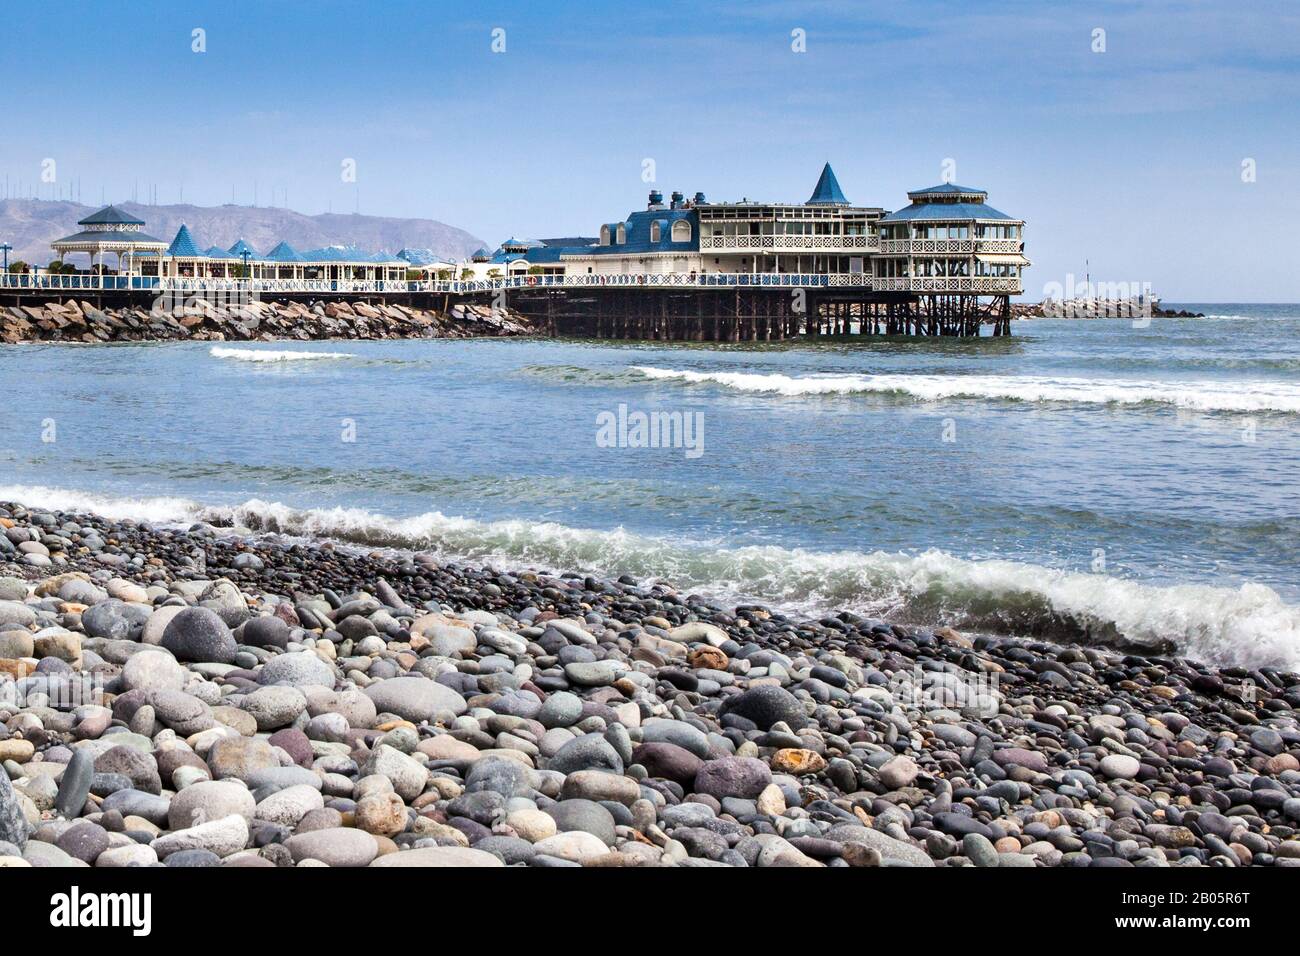 The pier and well known ' La Rosa Nautica' restaurant are seen from the pebble beach. Stock Photo